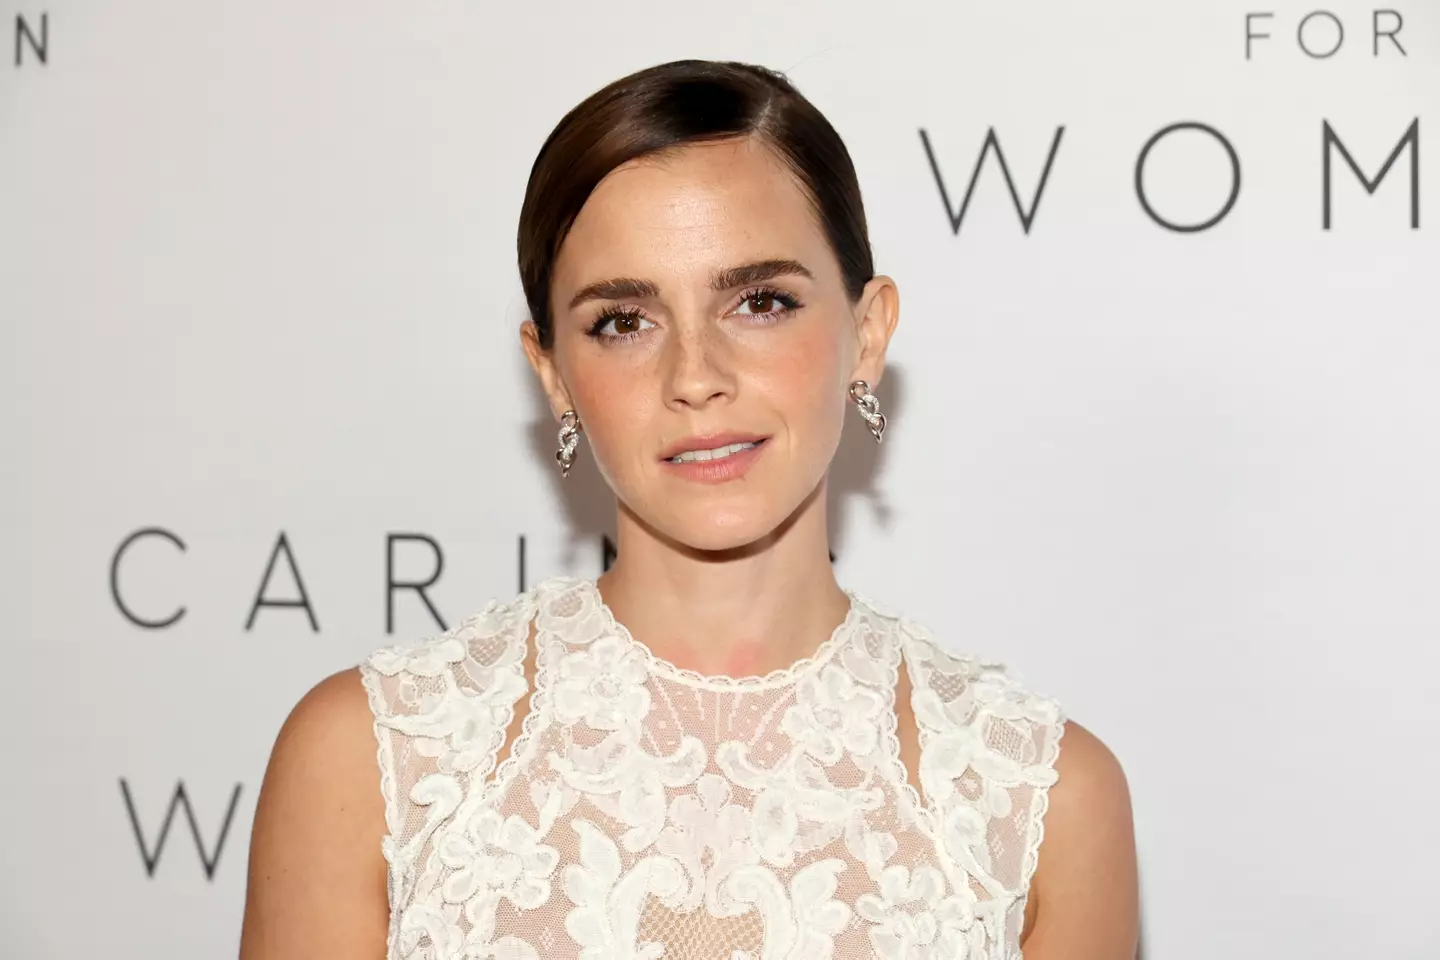 Emma Watson said she 'respects and loves' her trans followers. (Dia Dipasupil/Getty Images)